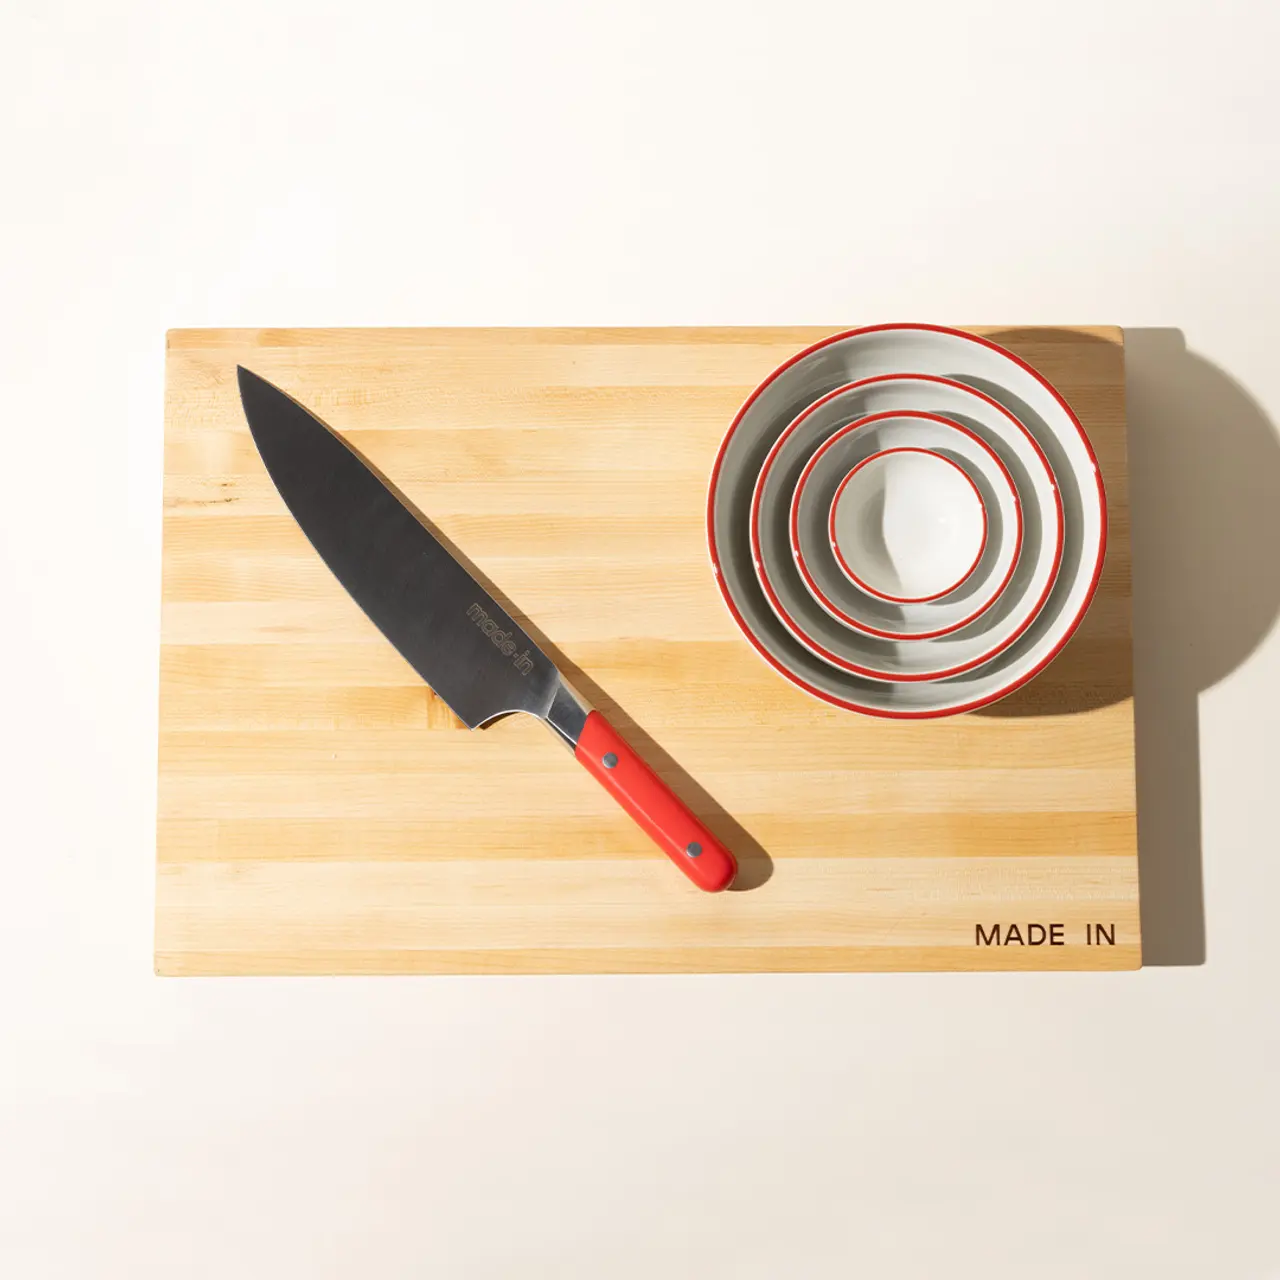 A chef's knife lies next to a stack of nested bowls on a wooden cutting board with "MADE IN" text.